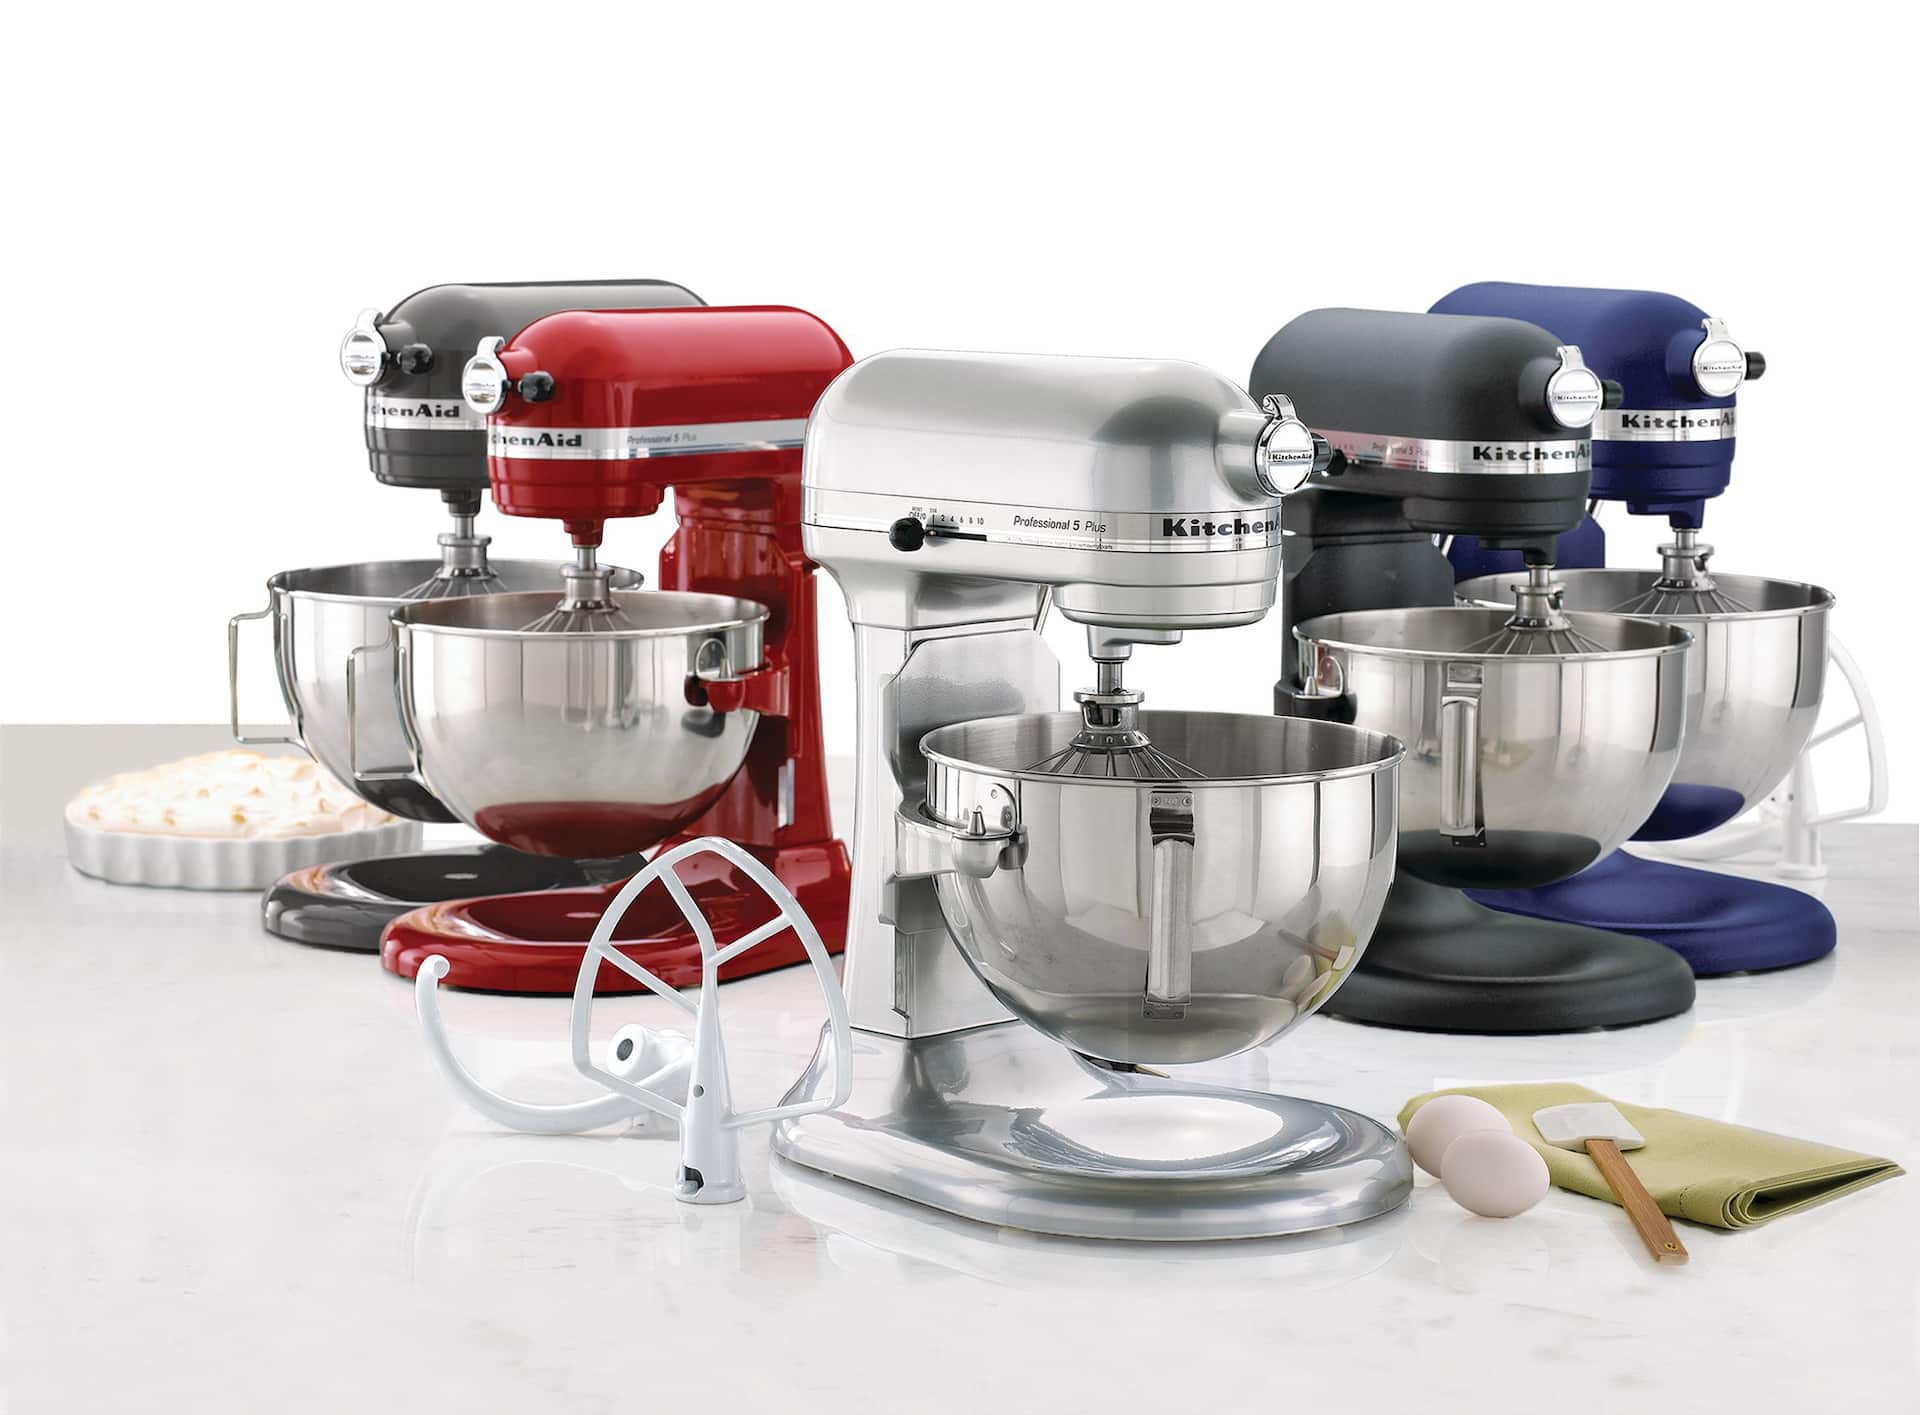 https://media-www.canadiantire.ca/product/living/kitchen/kitchen-appliances/0430034/kitchenaid-pro-5-plus-stand-mixer-liquid-graphite-5862689f-cce9-45a7-aae7-0a3d8aa5bce1-jpgrendition.jpg